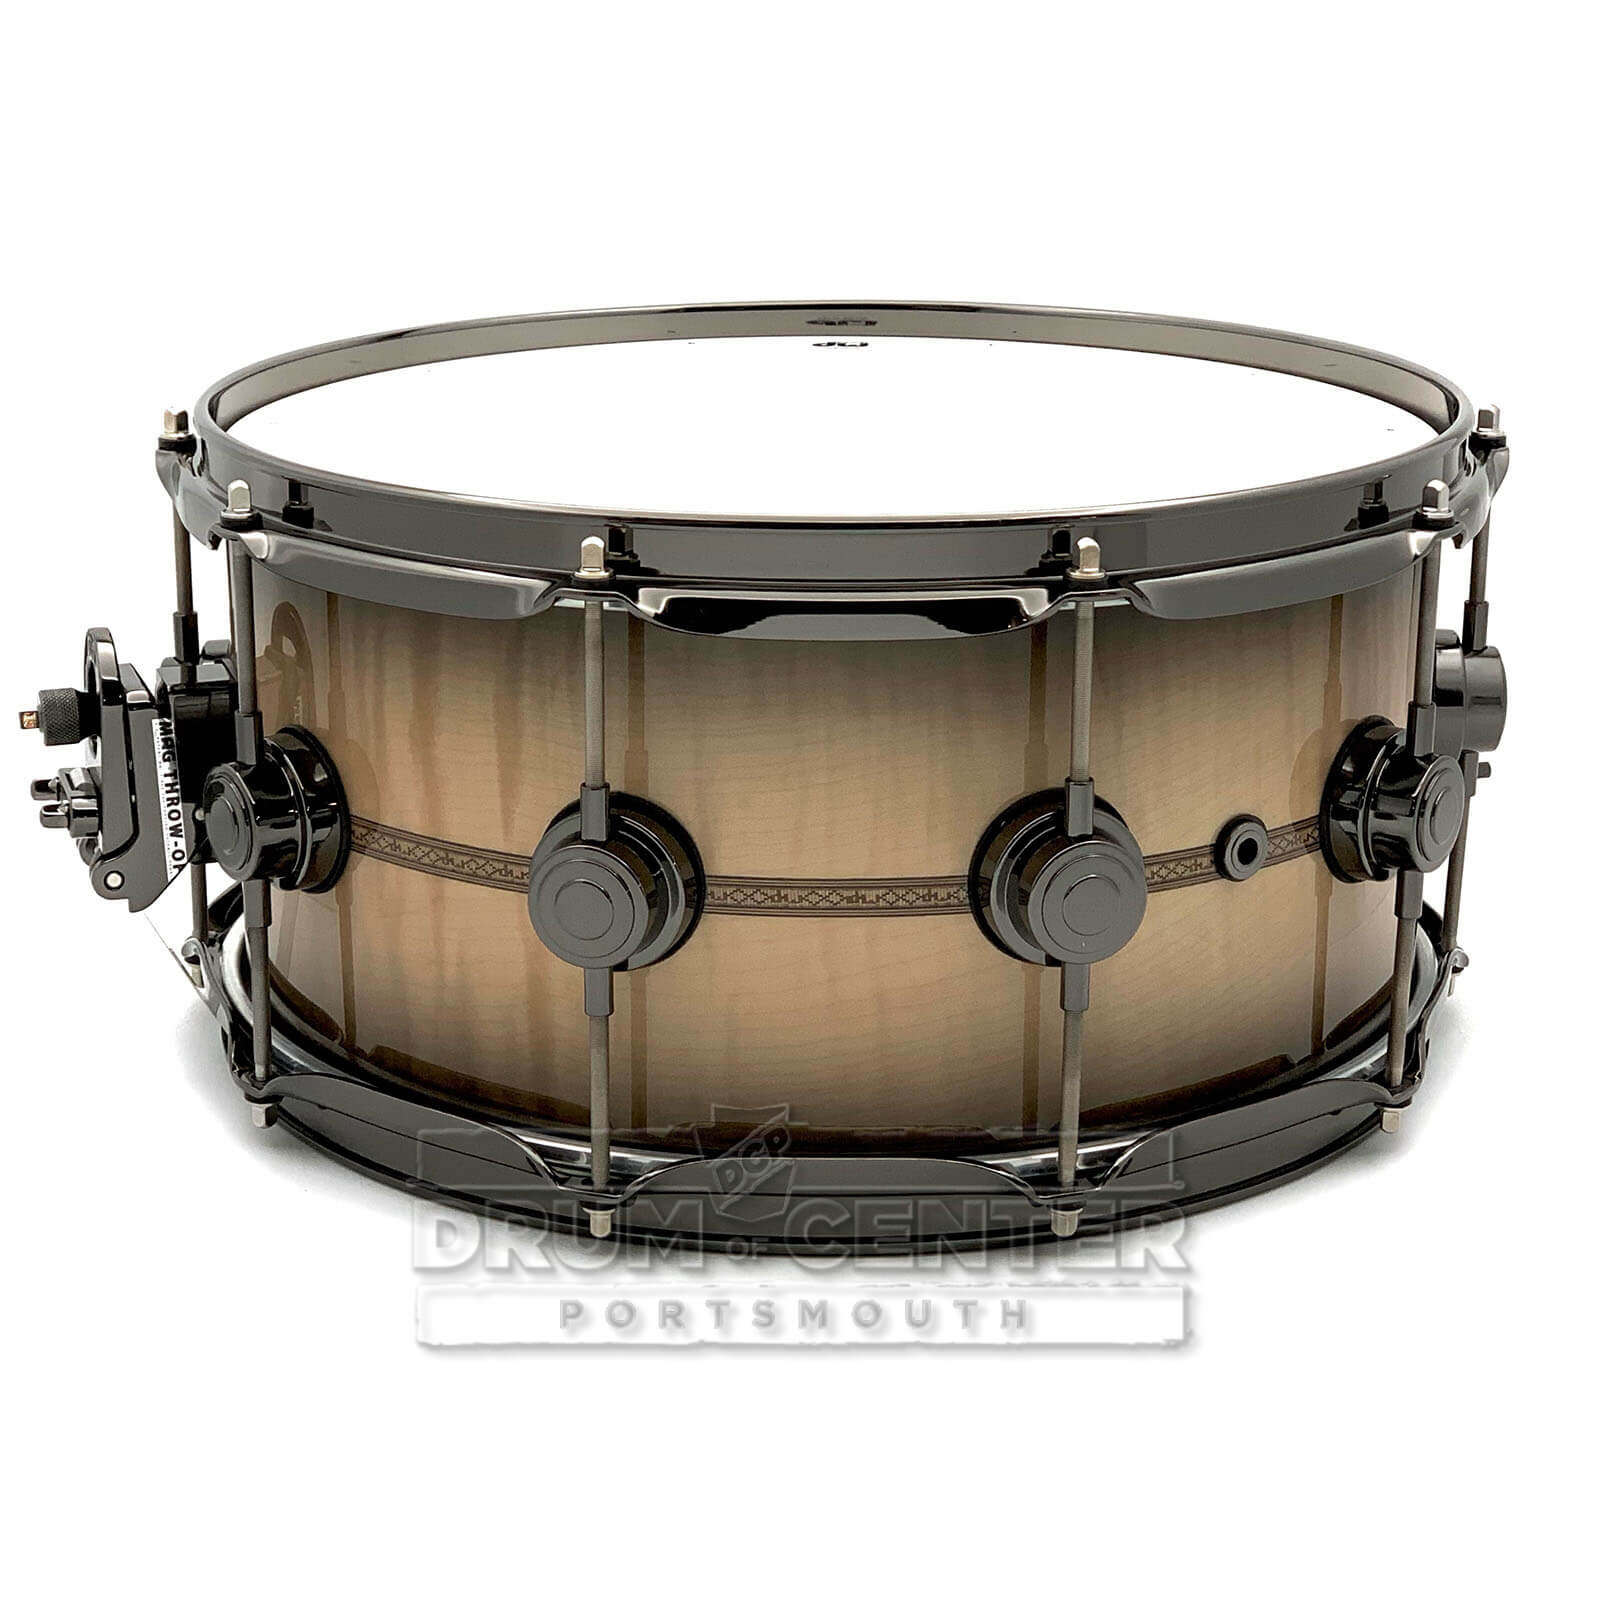 DW Collectors SSC Maple Snare Drum 14x6.5 Inlaid Figured Sycamore 